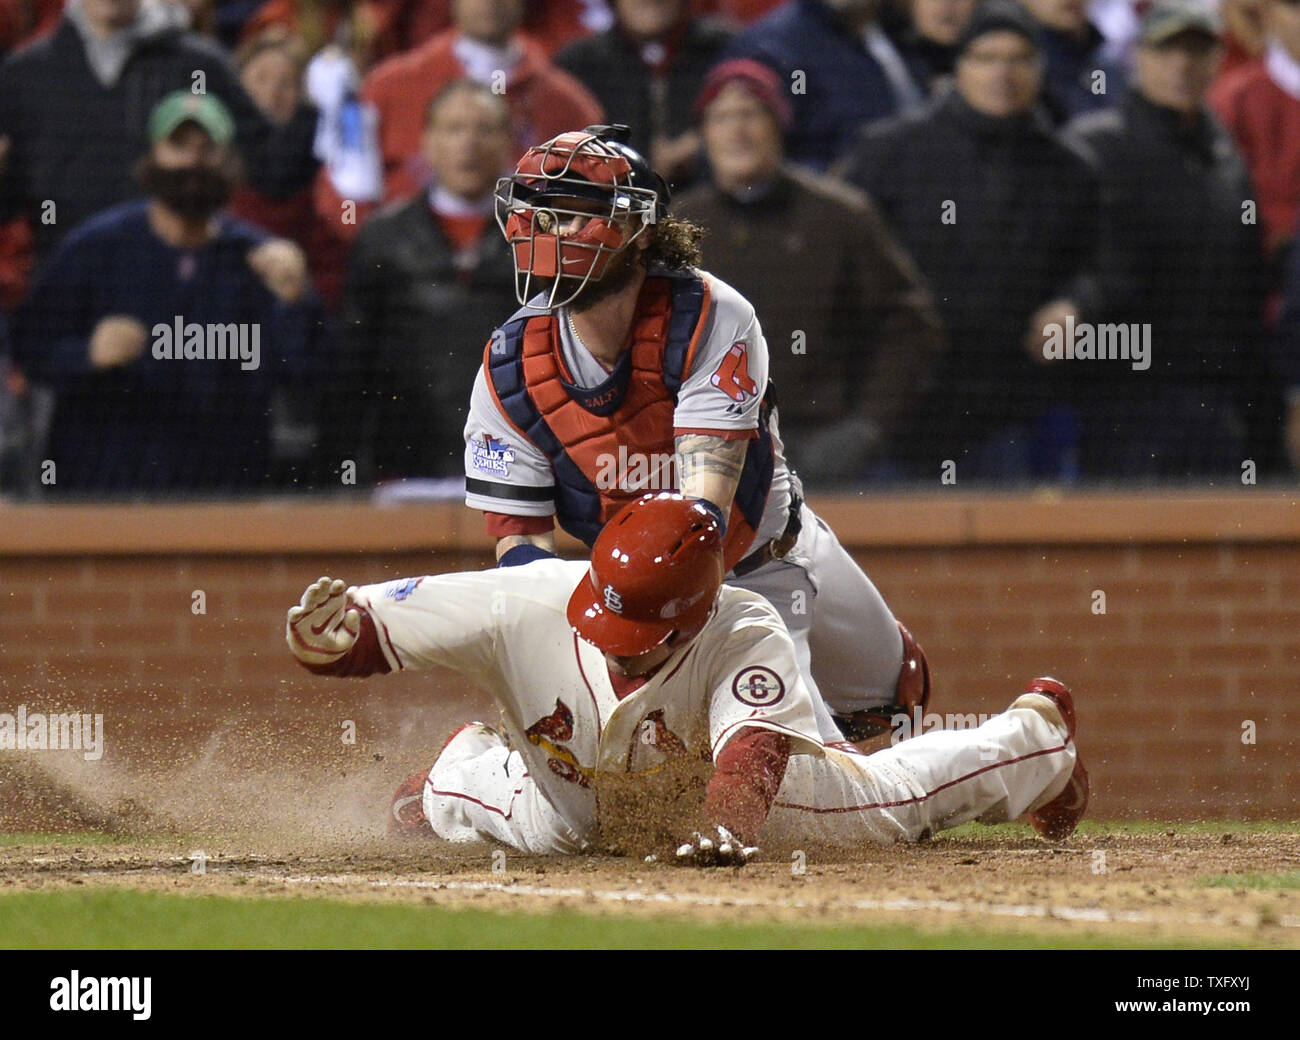 Home plate umpire Dana DeMuth (L) points to third base after Boston Red Sox  catcher Jarrod Saltalamacchia (R) tagged out St. Louis Cardinals' Allen  Craig at home plate when Craig went home